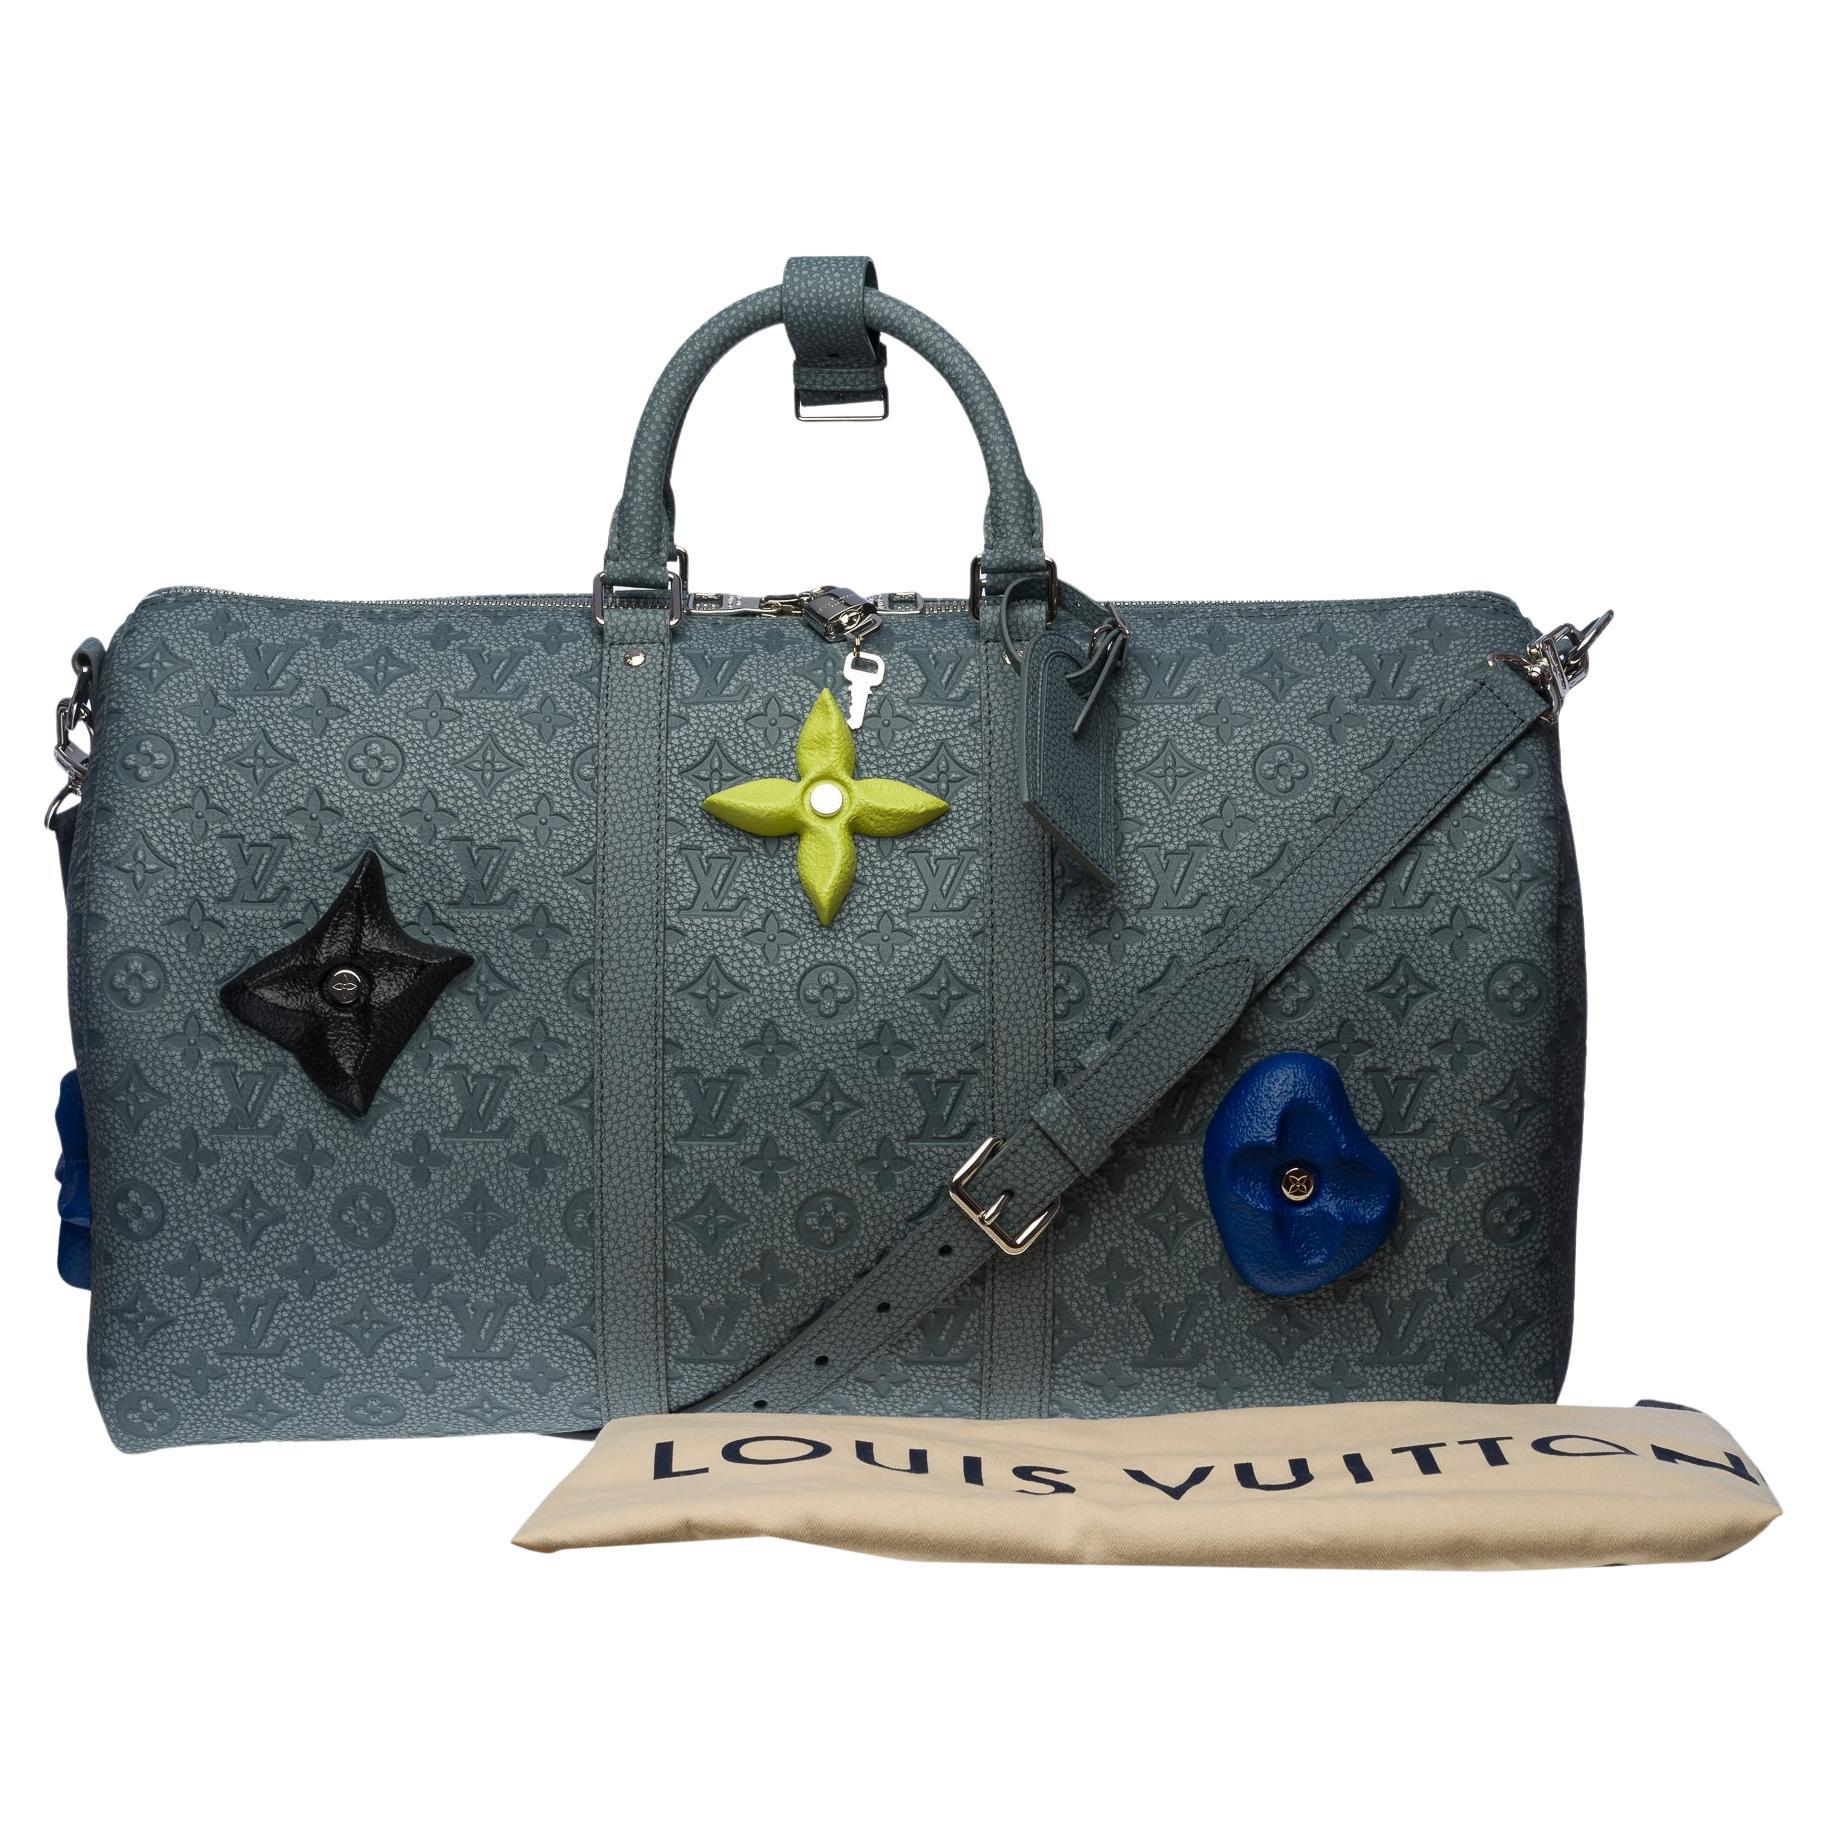 NEW-Louis Vuitton keepall 50 Granite strap Travel bag / FW 2022 by